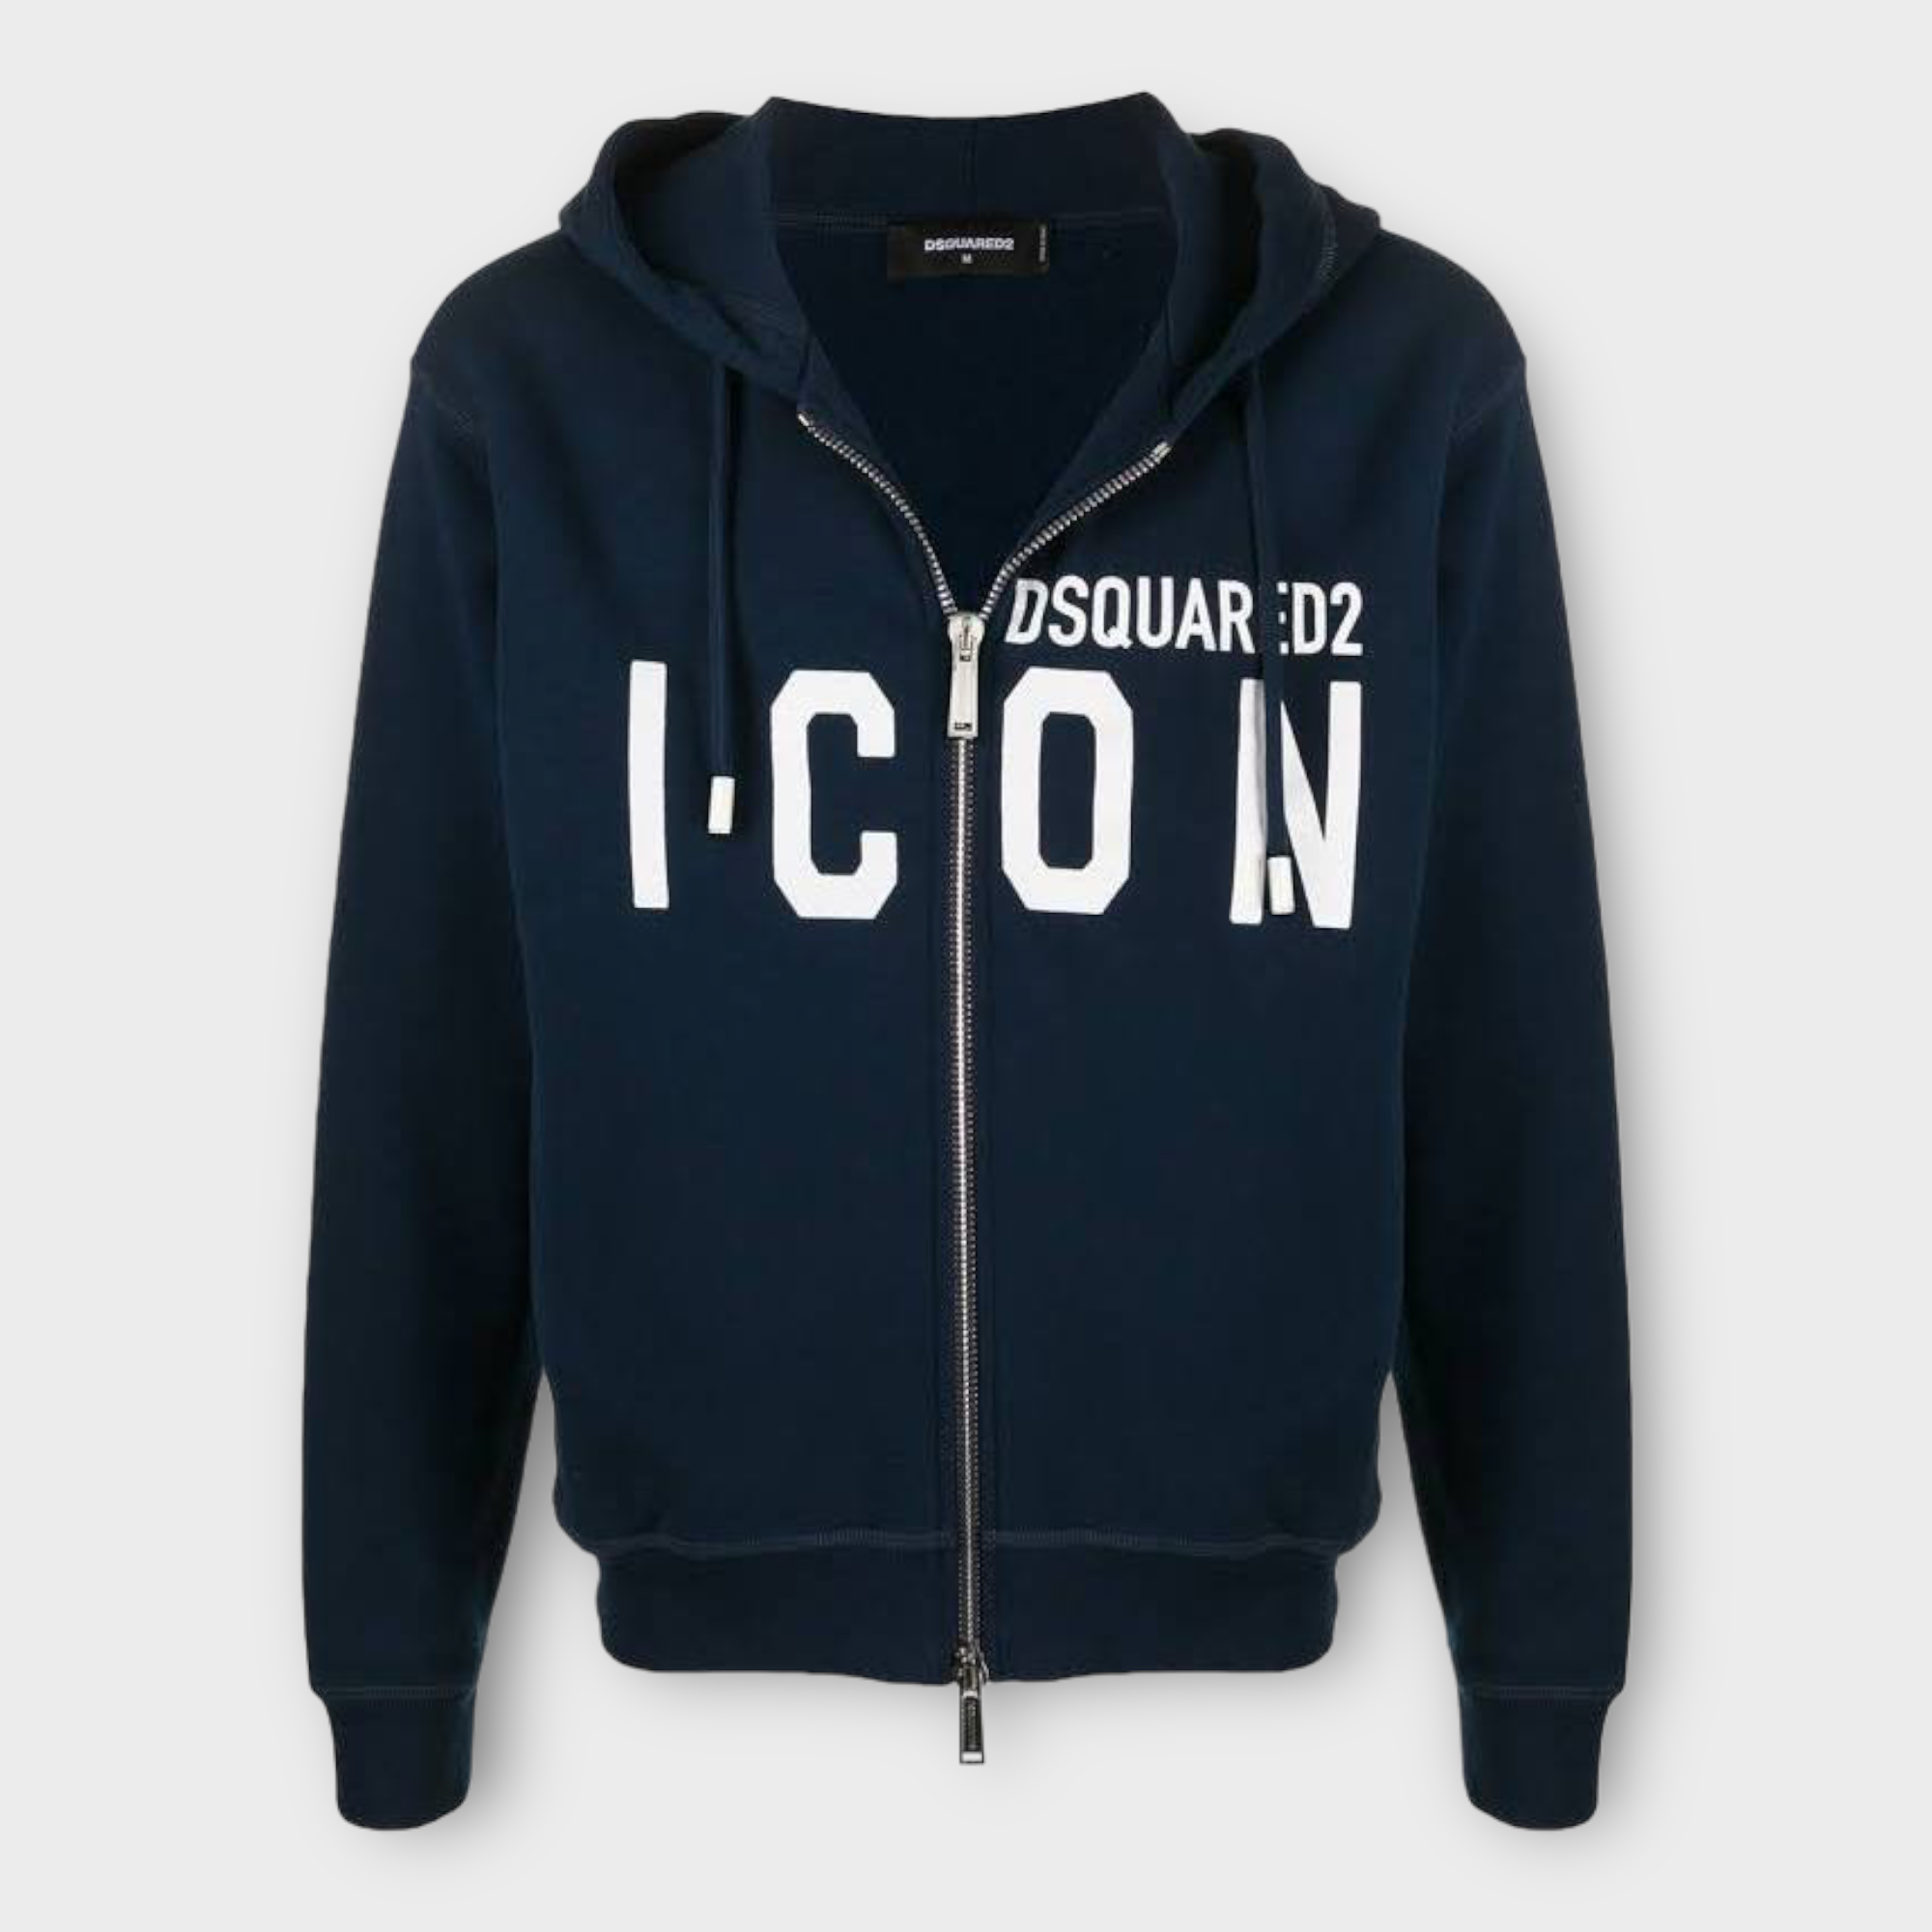 Dsquared2 Icon Zip Hoodie - Size M